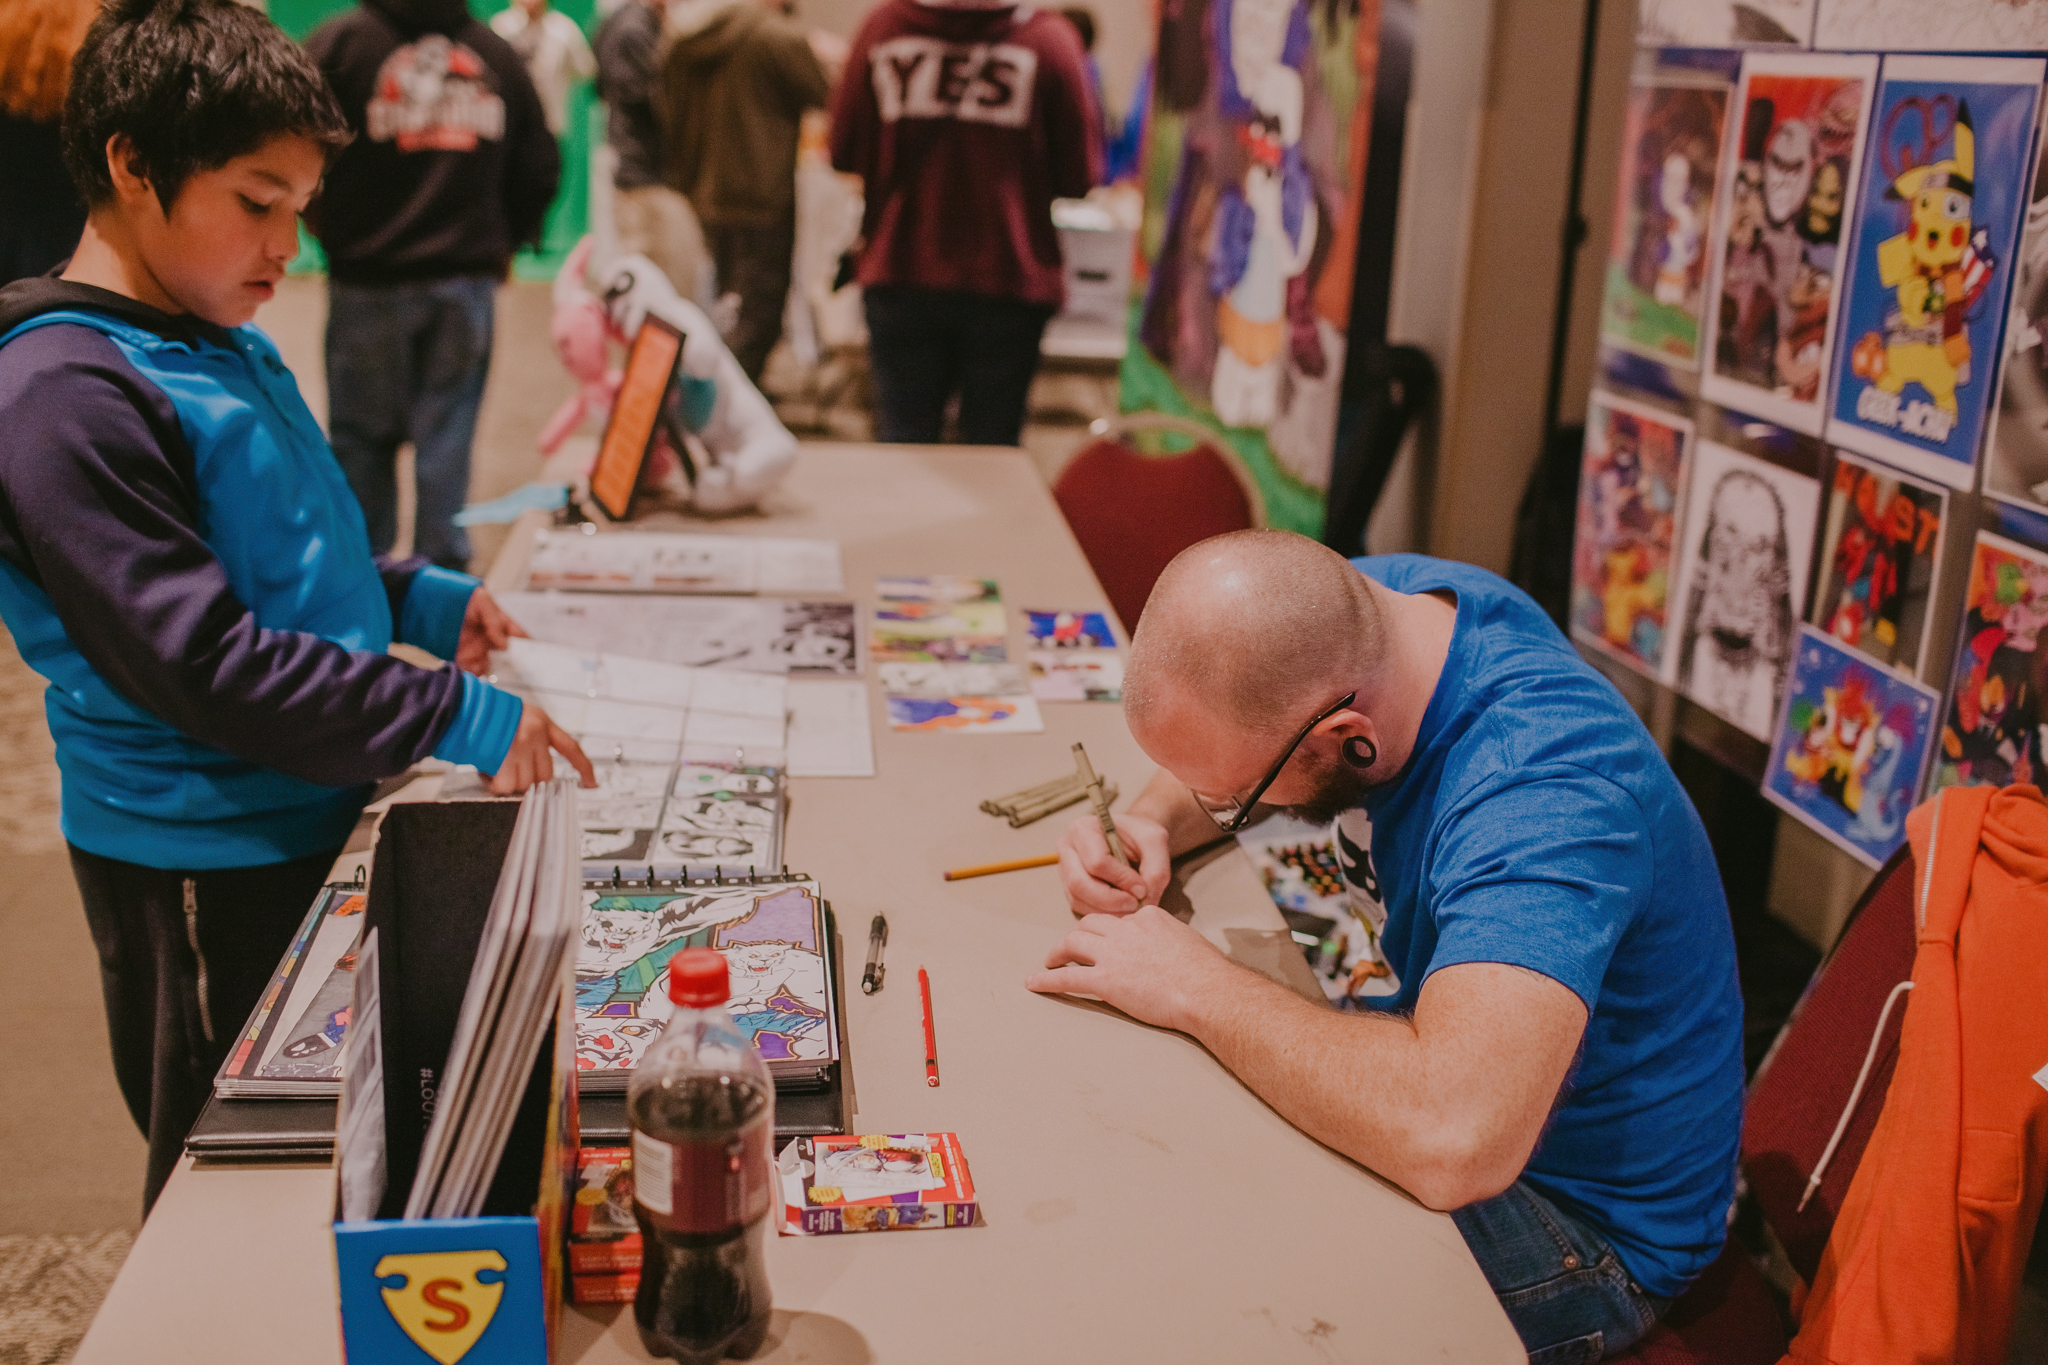 Statesville Comic Con Statesville, NC Mabyn Ludke Photography